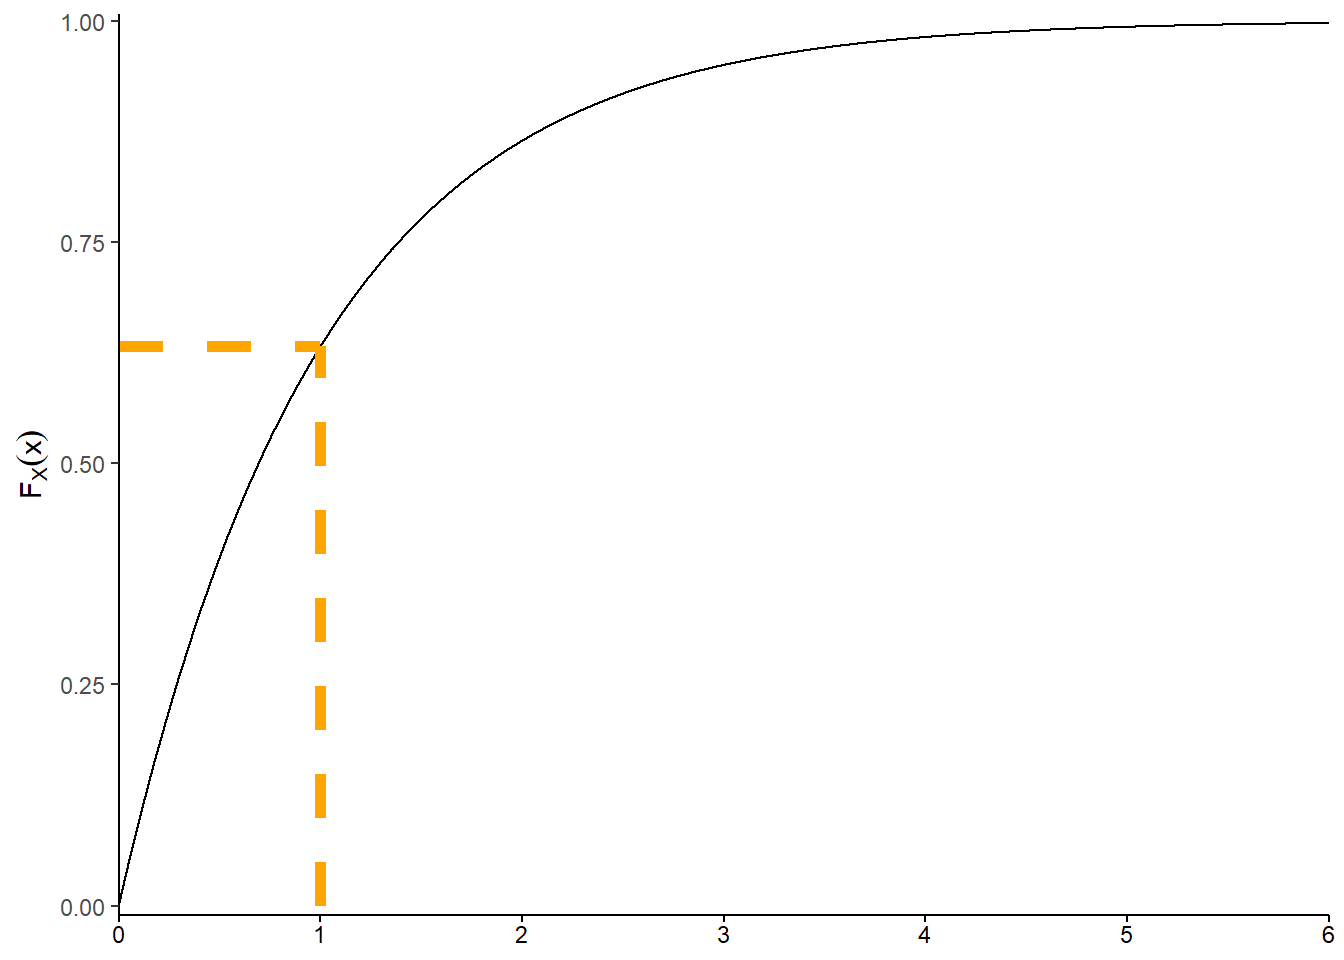 Illustration of the pdf (left) and the cdf (right) for the Exponential(1) distribution represented by the spinner in Figure 4.13. The shaded area in the plot on the left represents \(F_X(1)=\textrm{P}(X\le 1)\), which is \(1-e^{-1}\approx0.632\). This area is represented by the \((1, F_X(1))\) point in the cdf plot on the right, and in the region from 0 to 1 in the spinner in Figure 4.13.